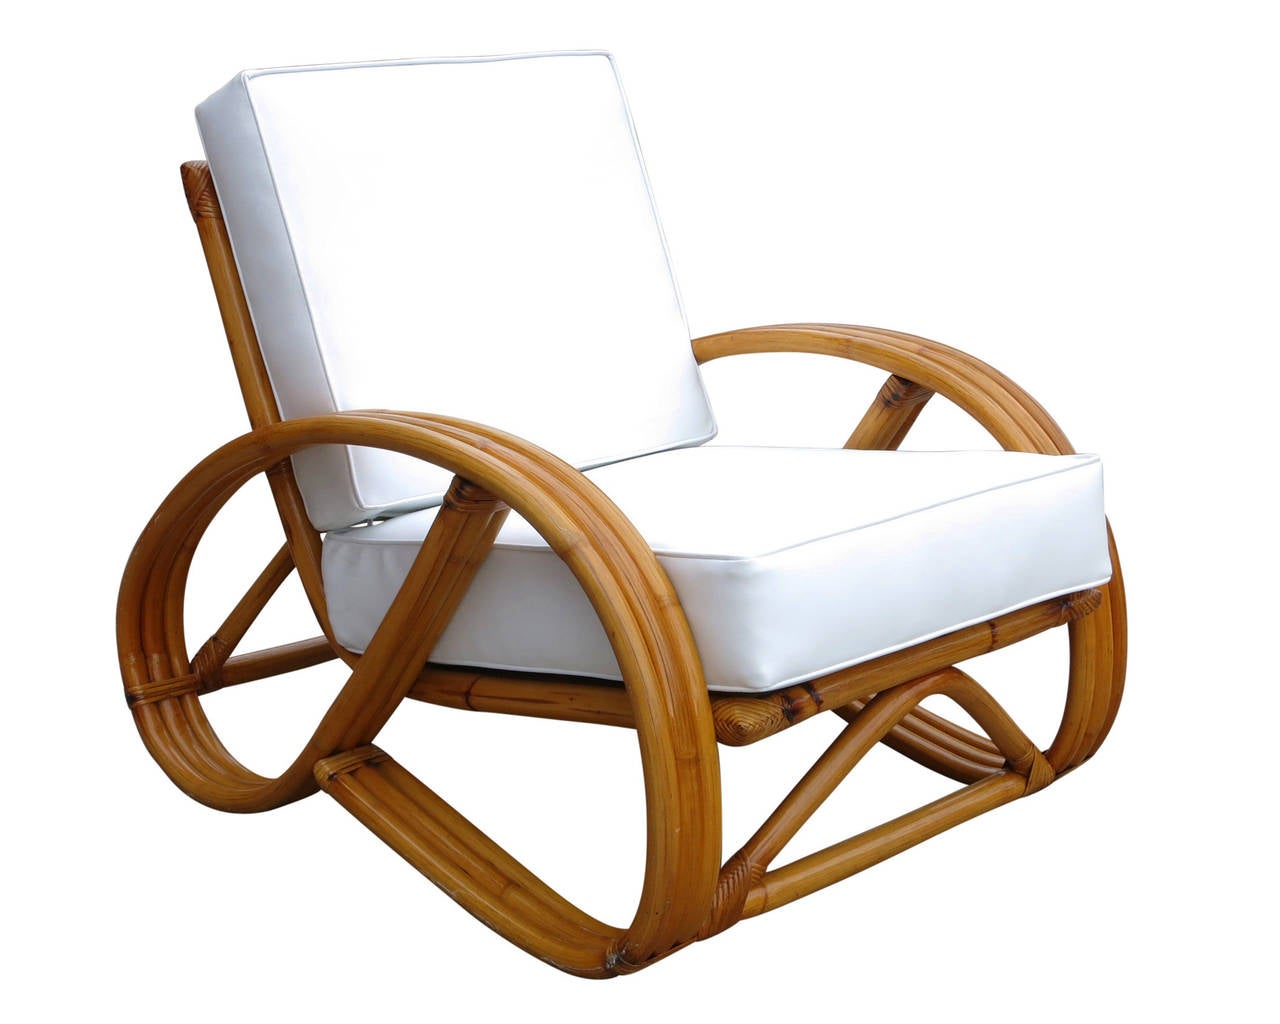 This round 3/4 pretzel arm rattan lounge chair has a unique decorative wave detail around the perimeter of the base. The accompanying bent rattan ottoman also features three strand U-shaped legs with matching wave detail.

Measures: Chair 31